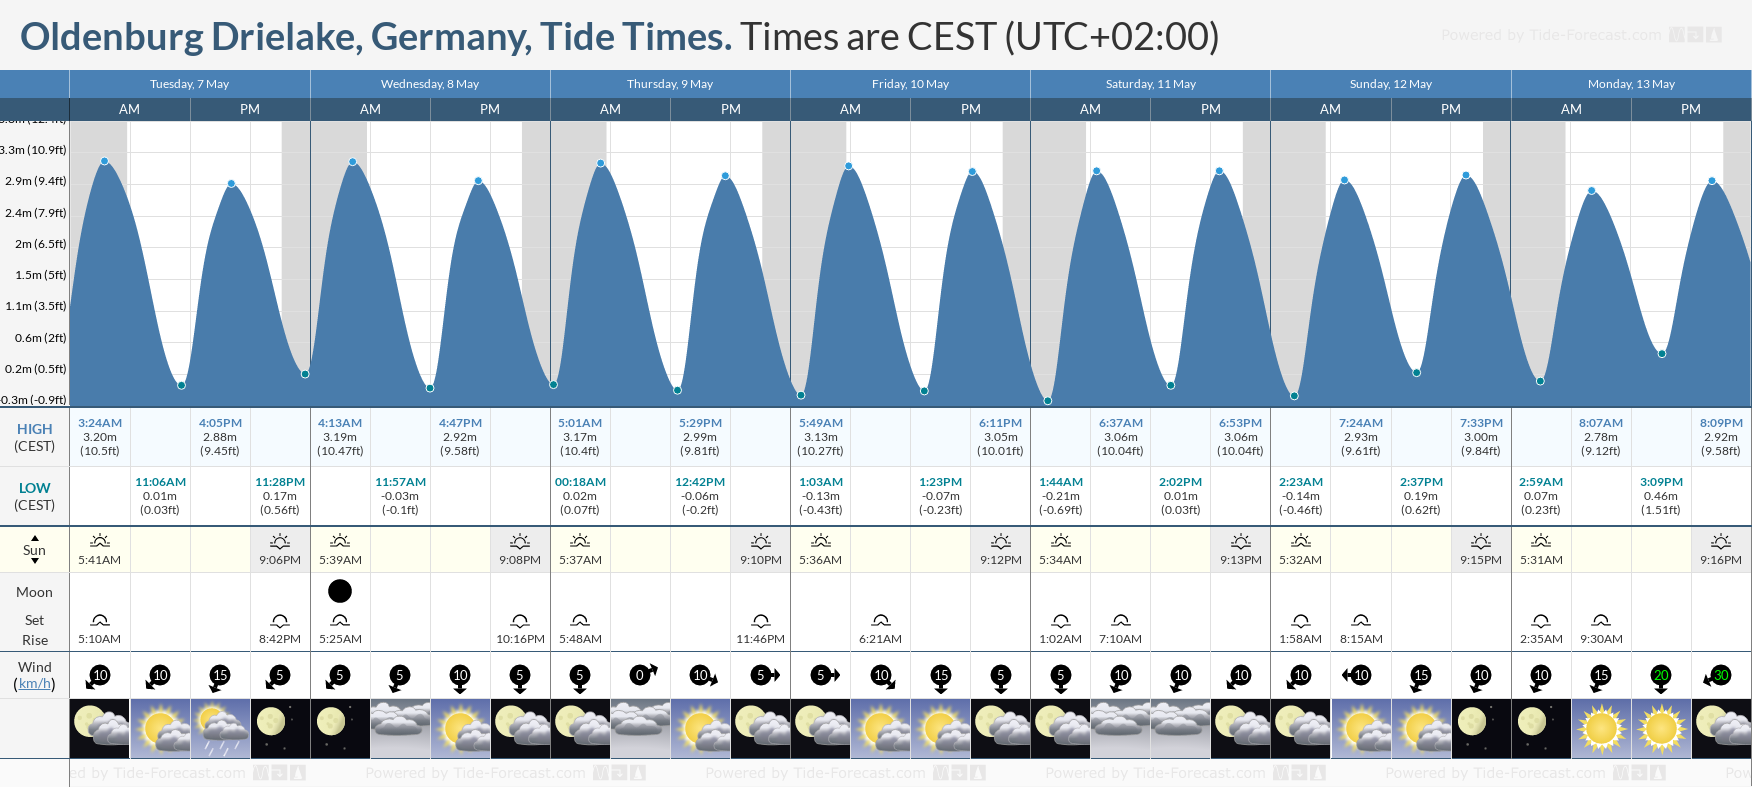 Oldenburg Drielake, Germany Tide Chart including high and low tide times for the next 7 days